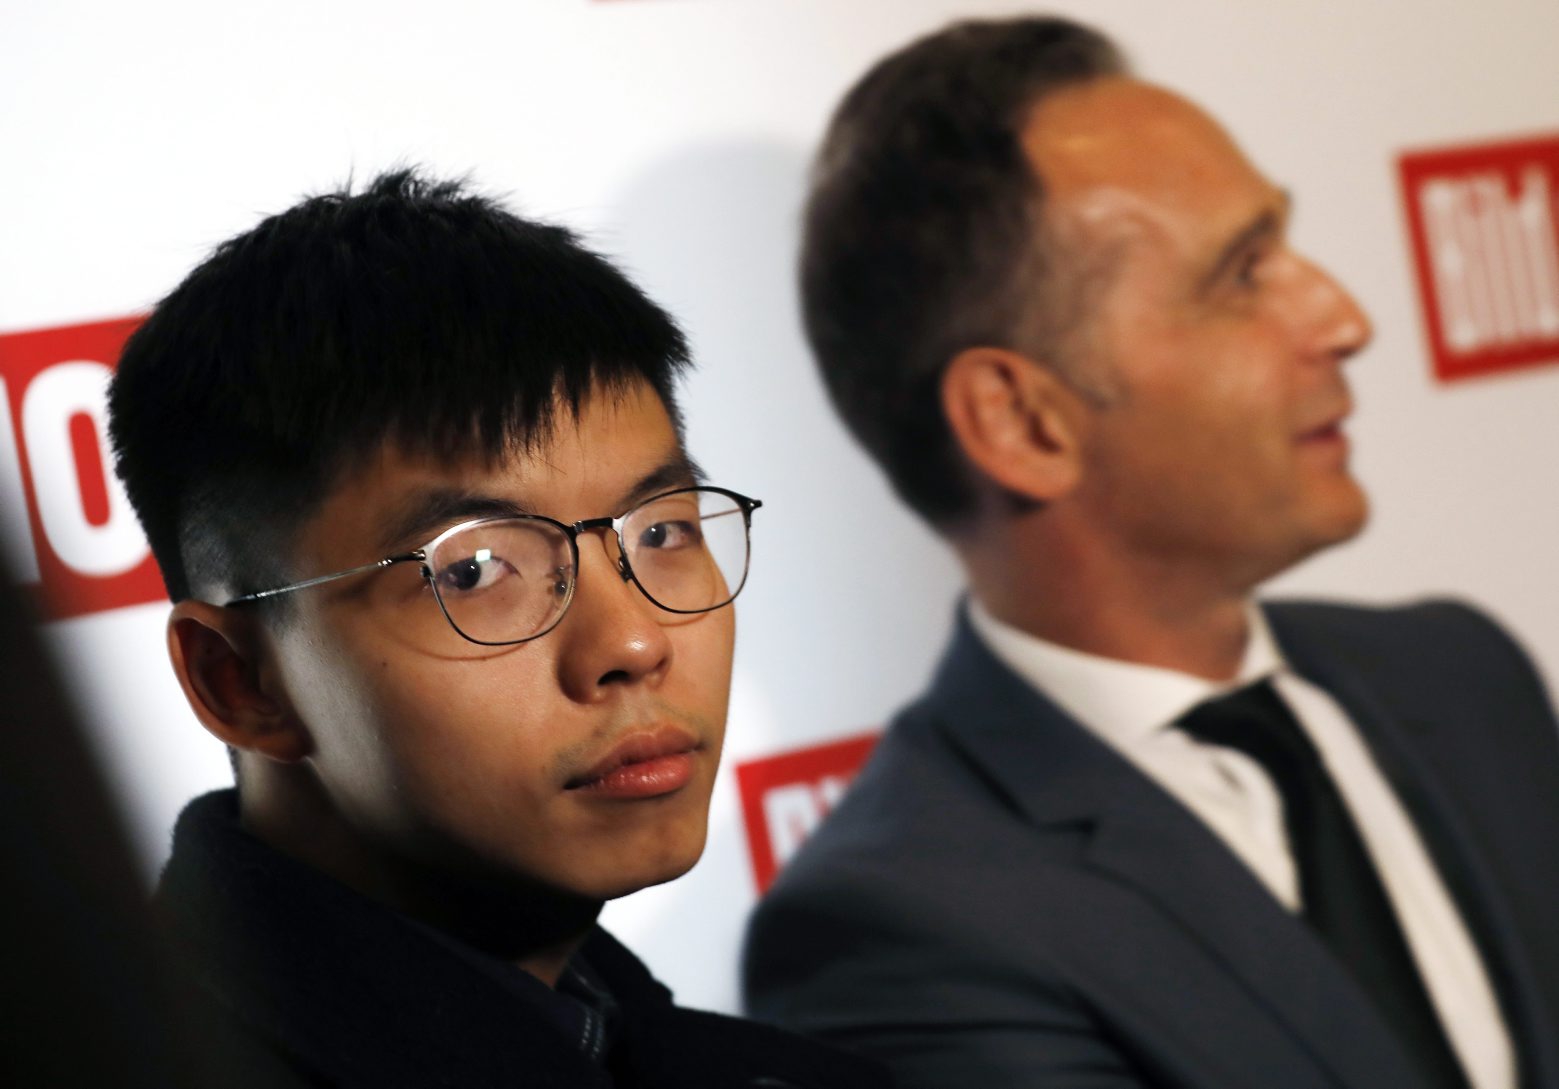 epaselect epa07831286 Hong Kong activist Joshua Wong (L) looks on next to German Foreign Minister, Heiko Maas, in the 'BILD100 summer party' event in Berlin, Germany, 09 September 2019. 100 of the most important decision-makers from politics and business as well as well-known personalities from sports, art and culture are expected at the event held by Germany's highest-circulation newspaper BILD.  EPA/FELIPE TRUEBA epaselect GERMANY MEDIA PEOPLE